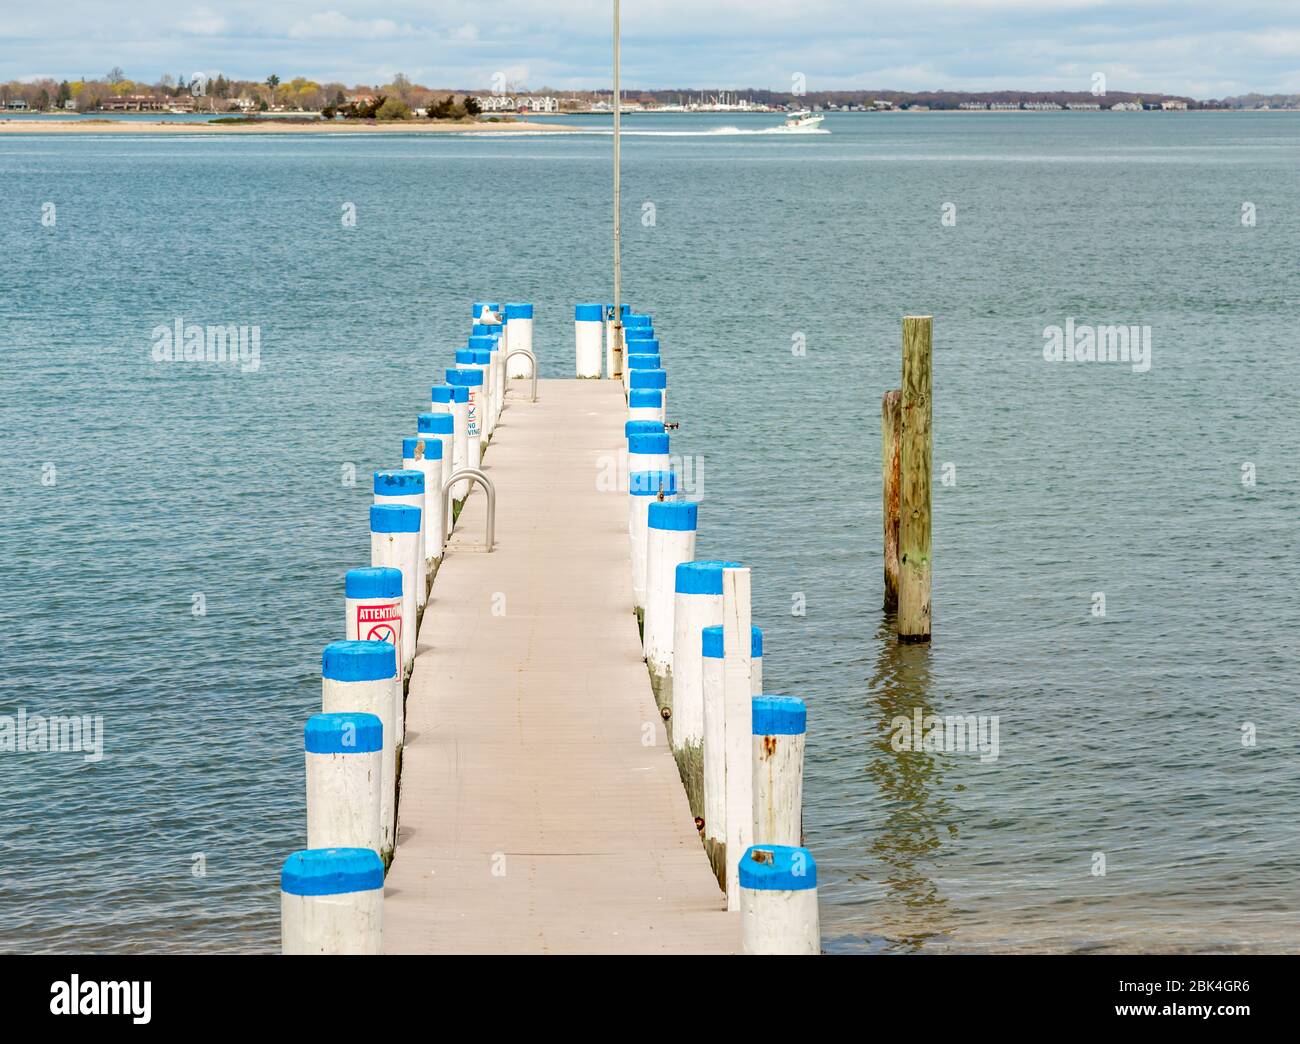 Blue caps on white pilings on a dock on Shelter Island, NY Stock Photo